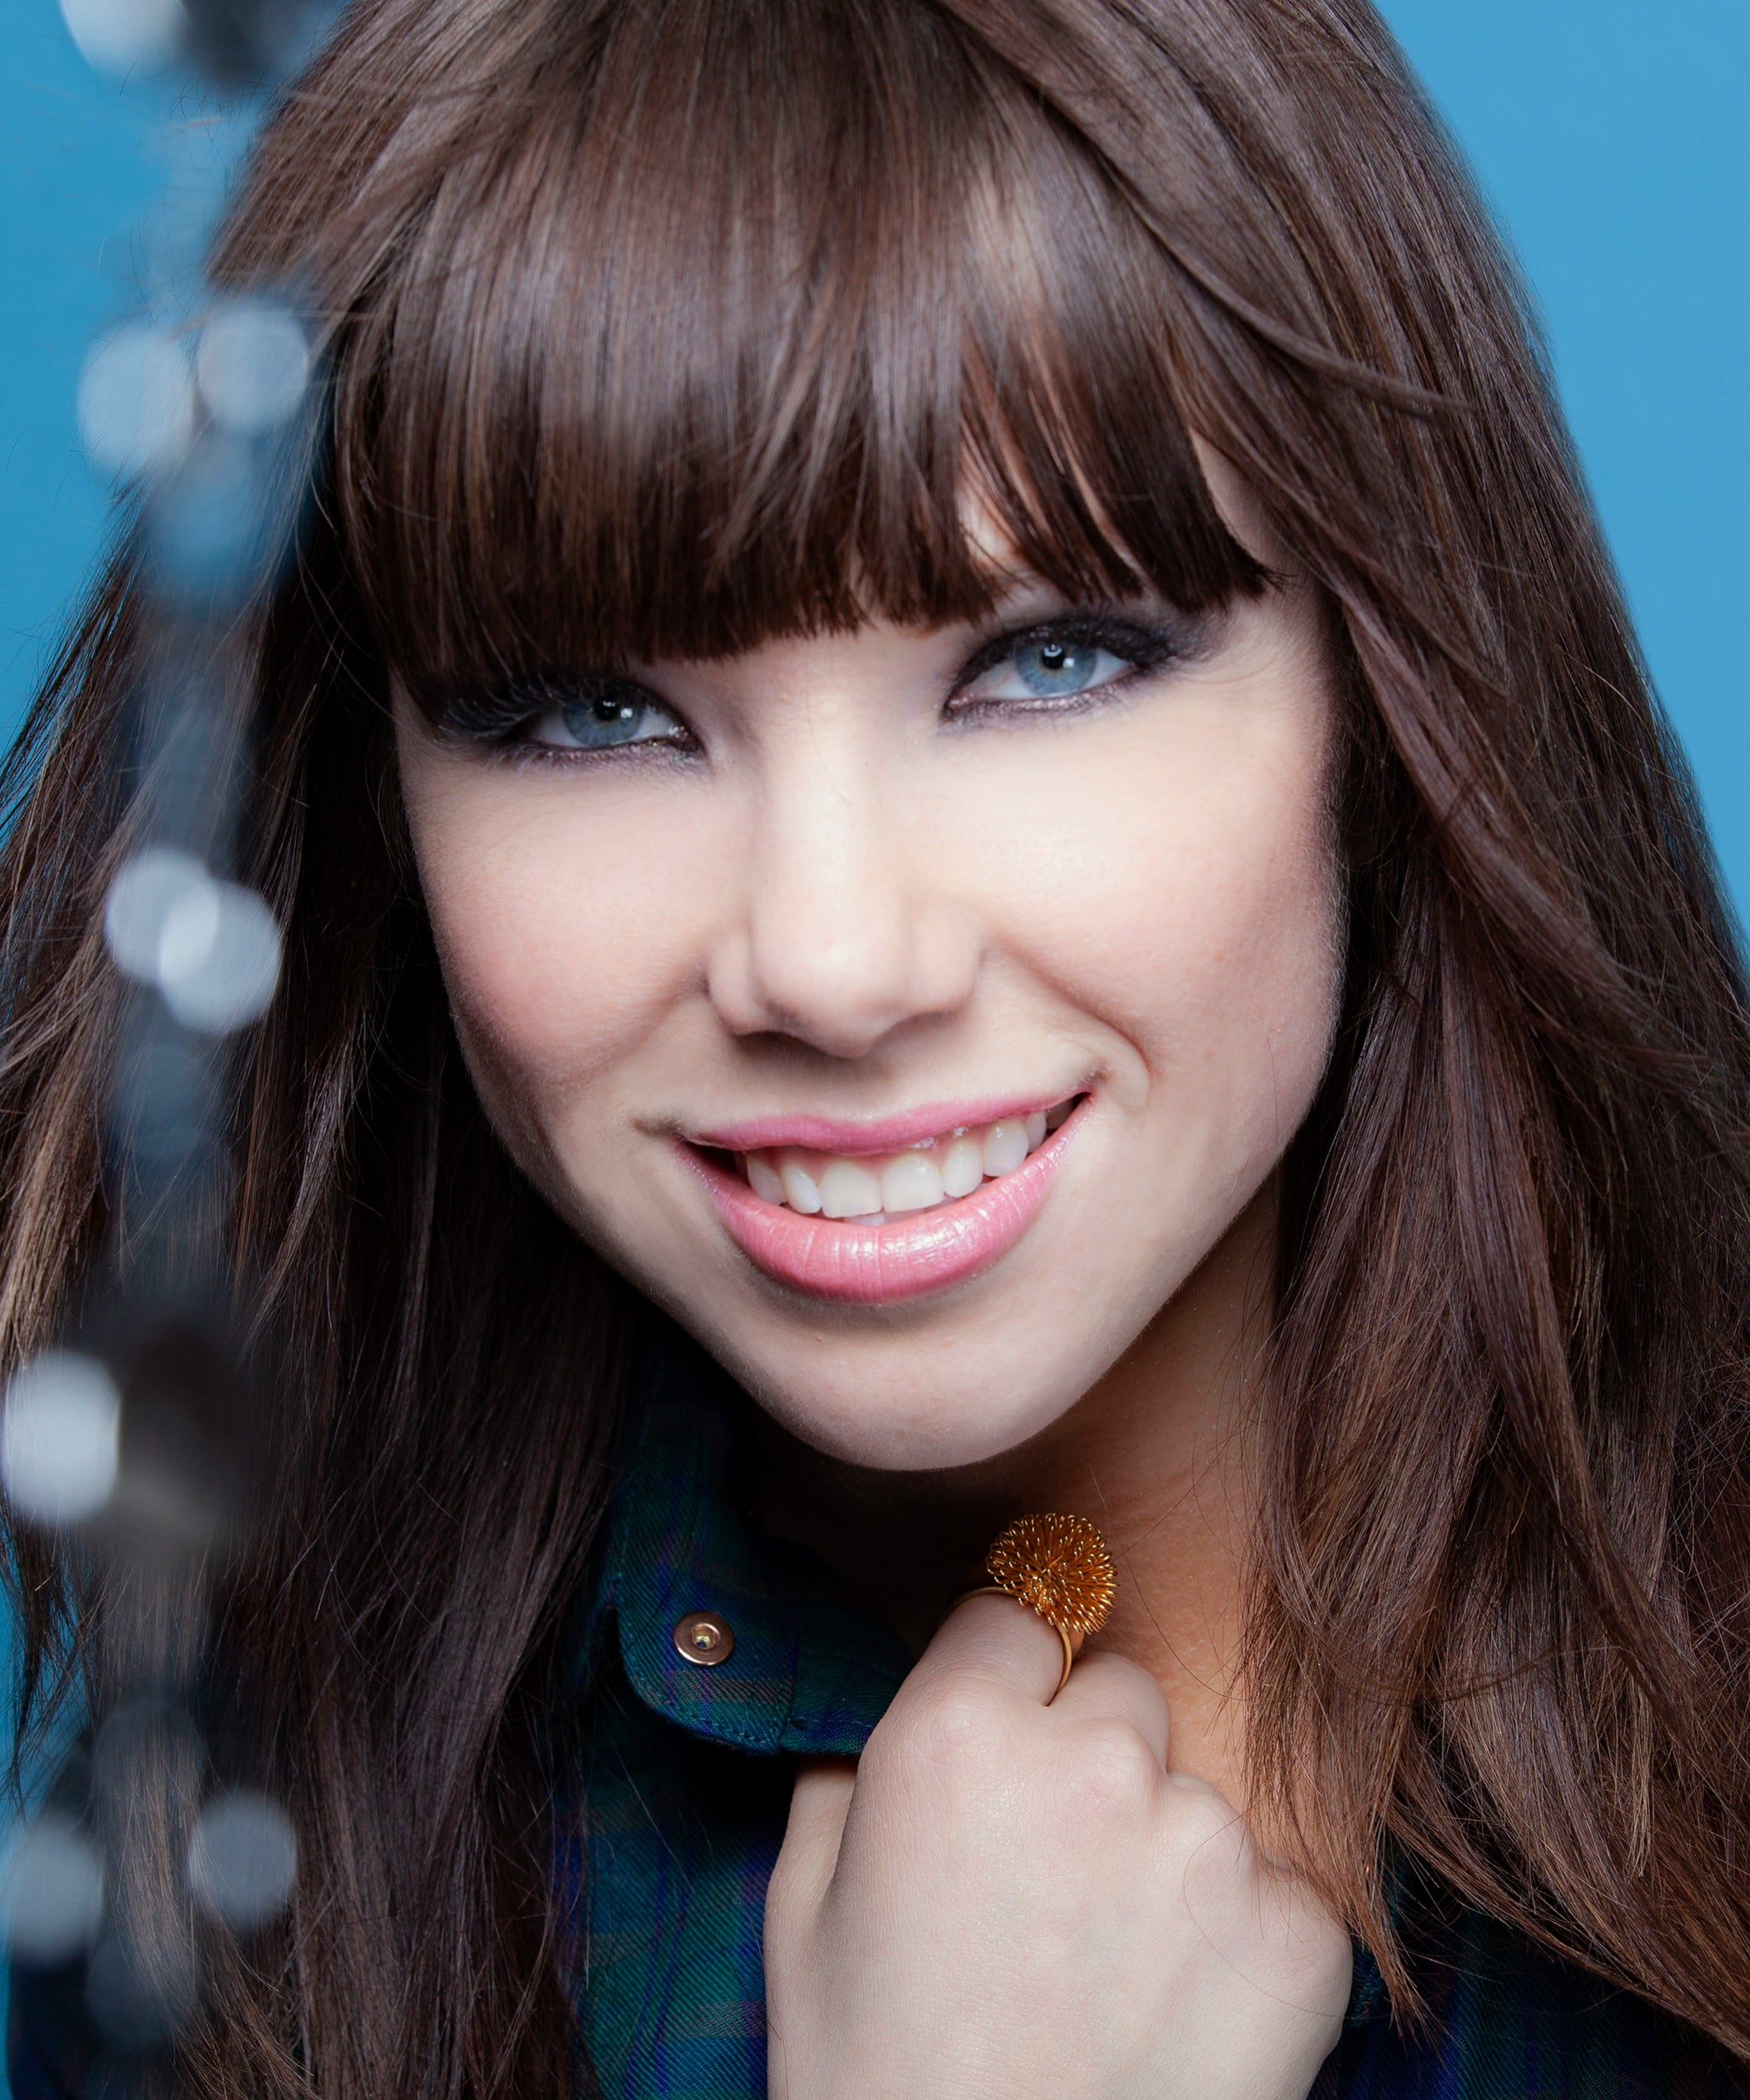 Carly Rae Jepsen on myCast - Fan Casting Your Favorite Stories